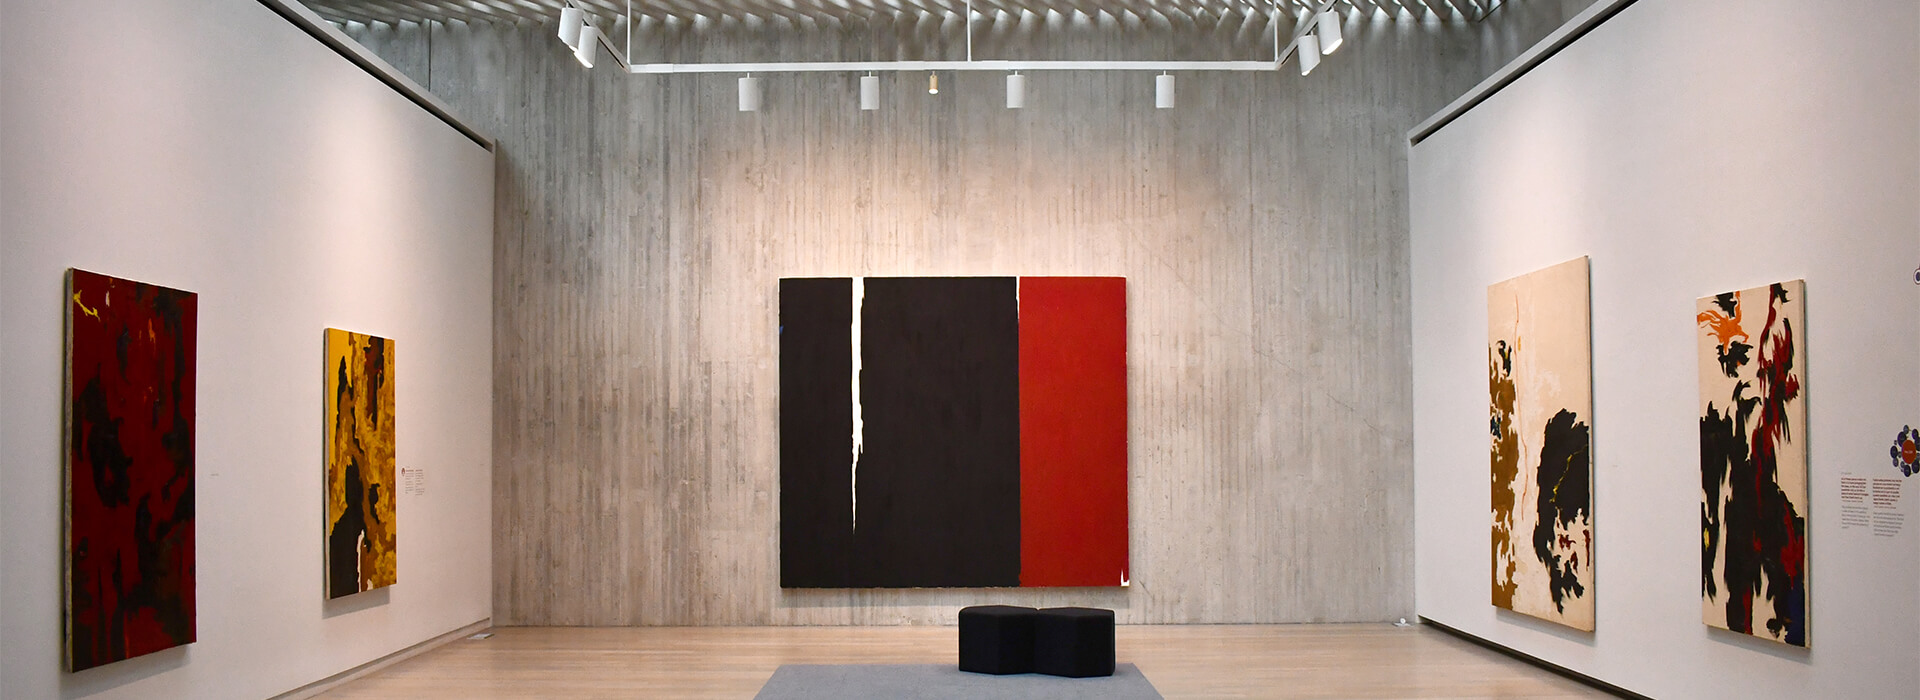 Gallery photo of the Clyfford Still Museum